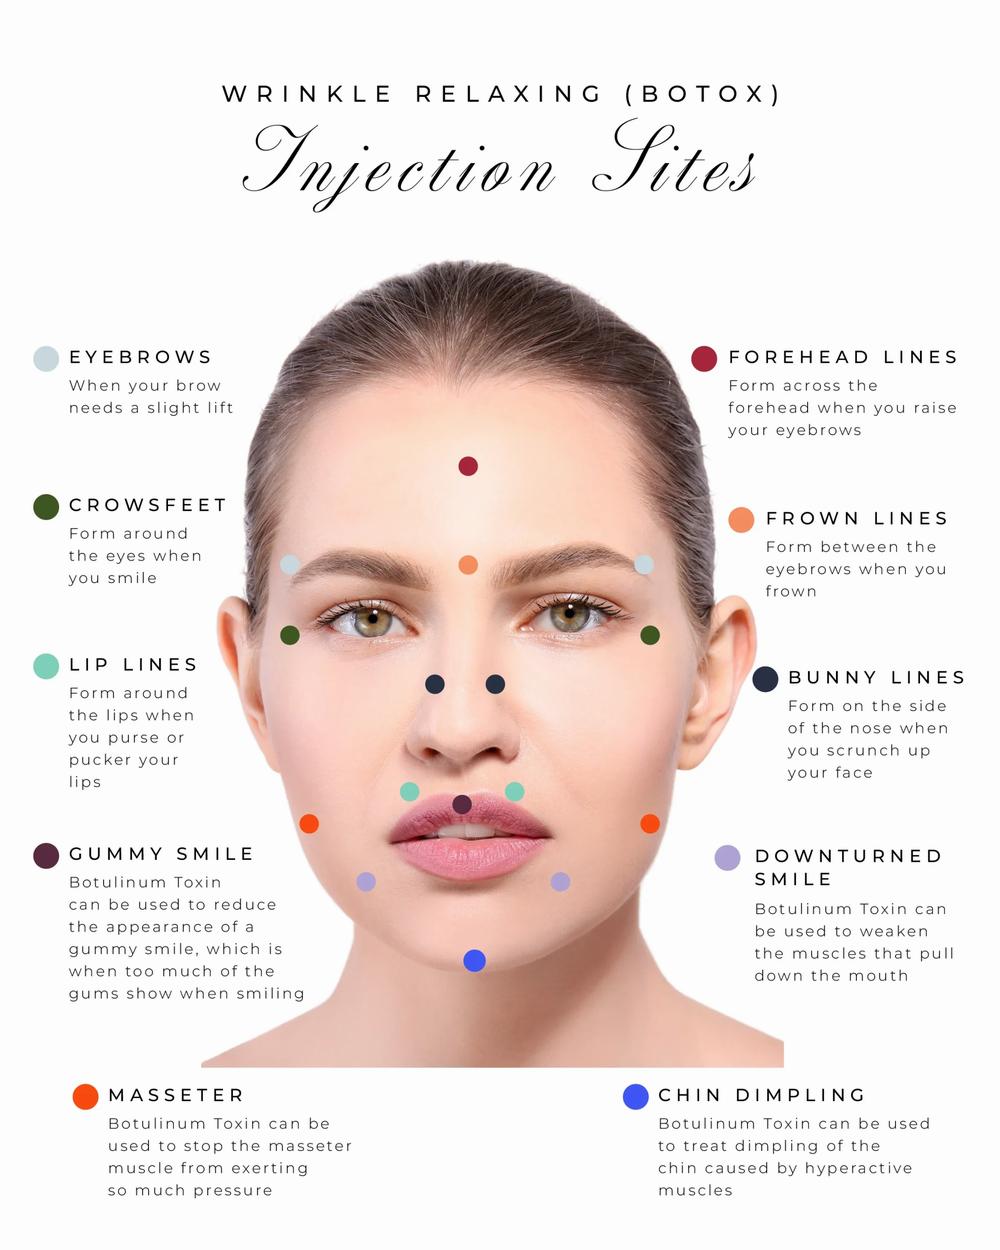 The image is an infographic showing the different injection sites on the face for Botox injections.